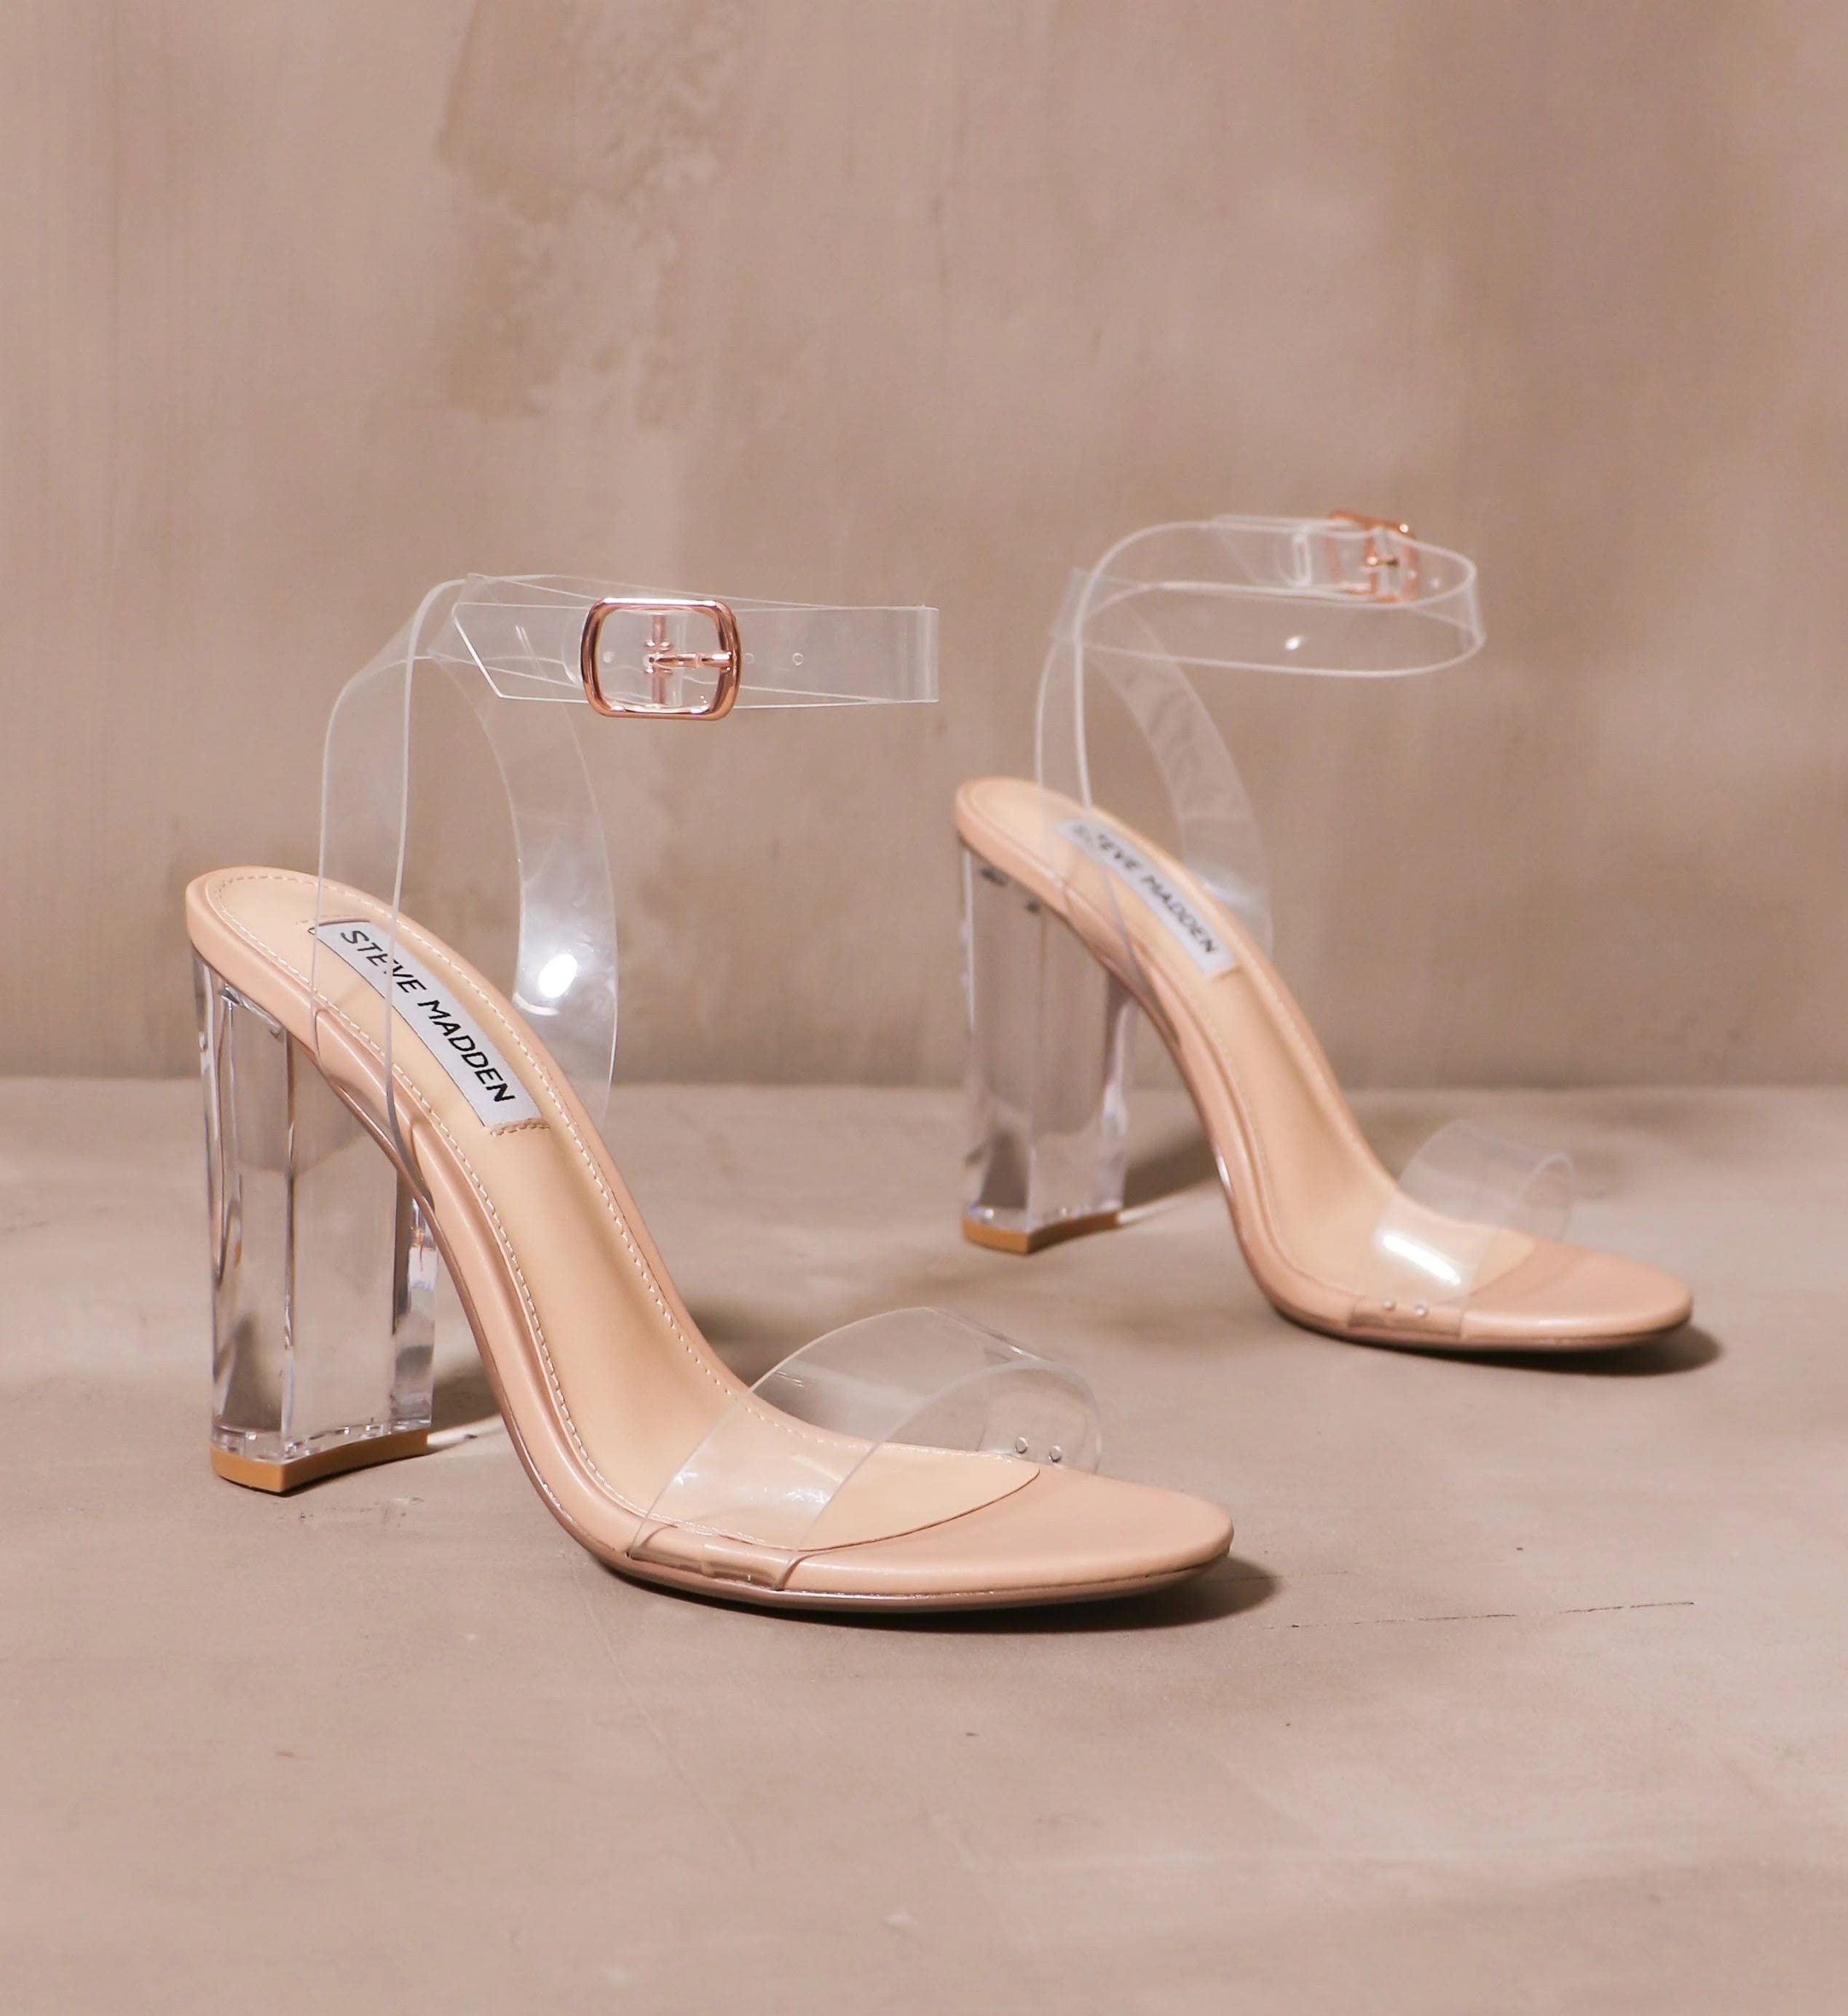 Elevated Comfort: Steve Madden Camille Clear Heeled Sandals | Image